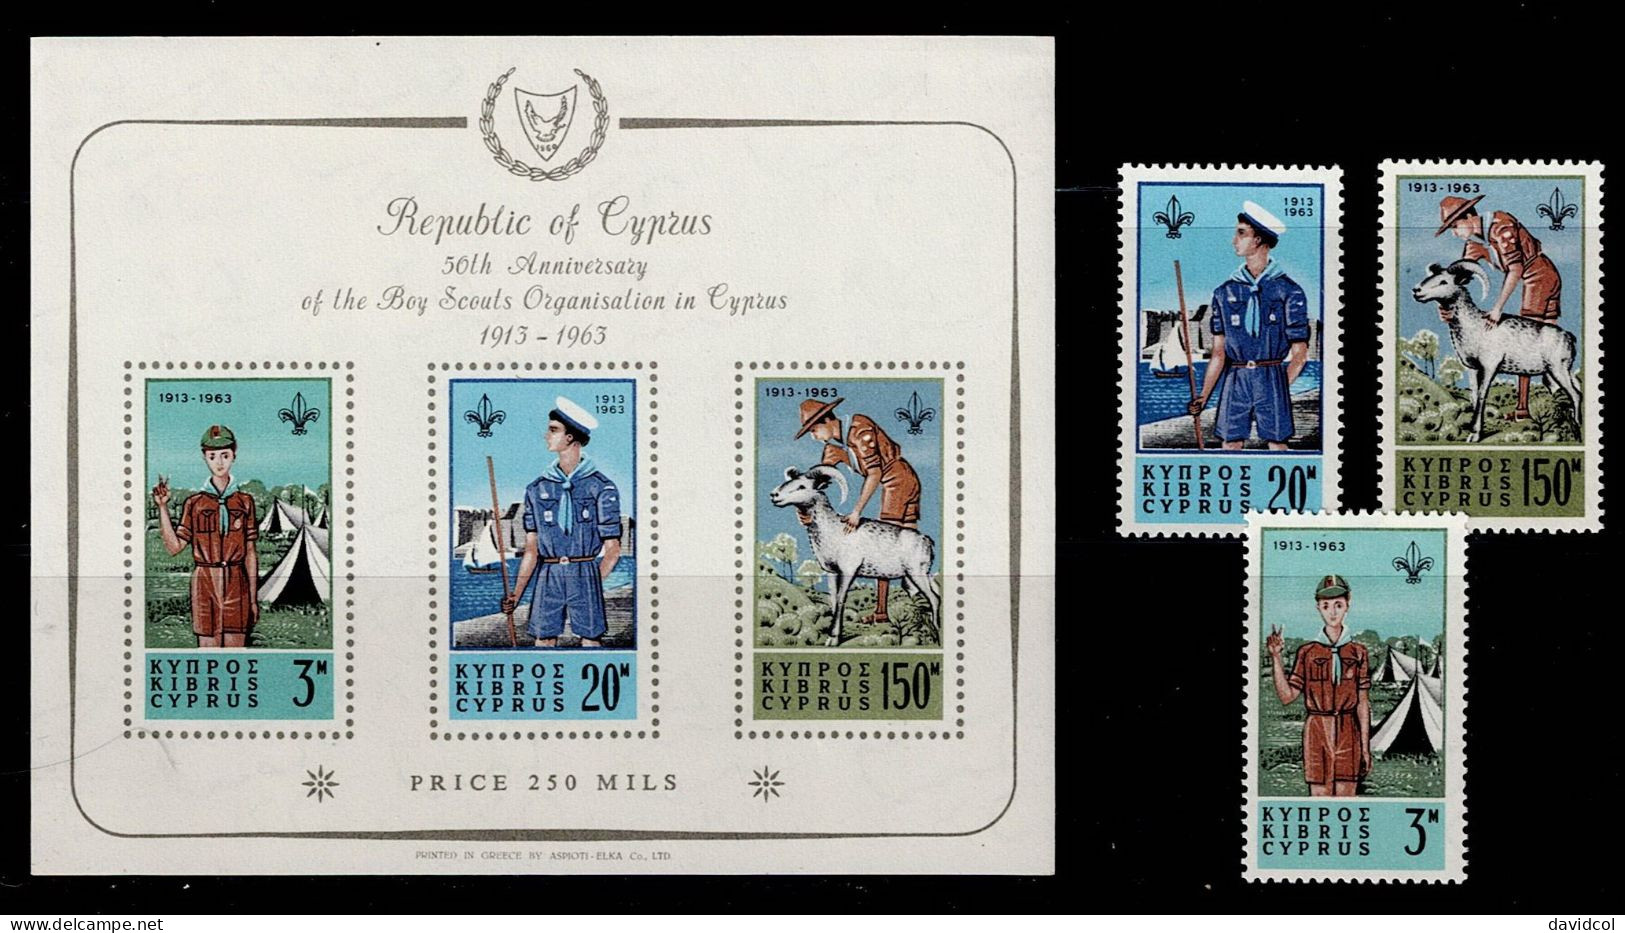 CHP-02- CYPRUS - 1963 - MNH -SCOUTS- 50TH ANNIVERSARY BOY SCOUTS OF CYPRUS - Unused Stamps